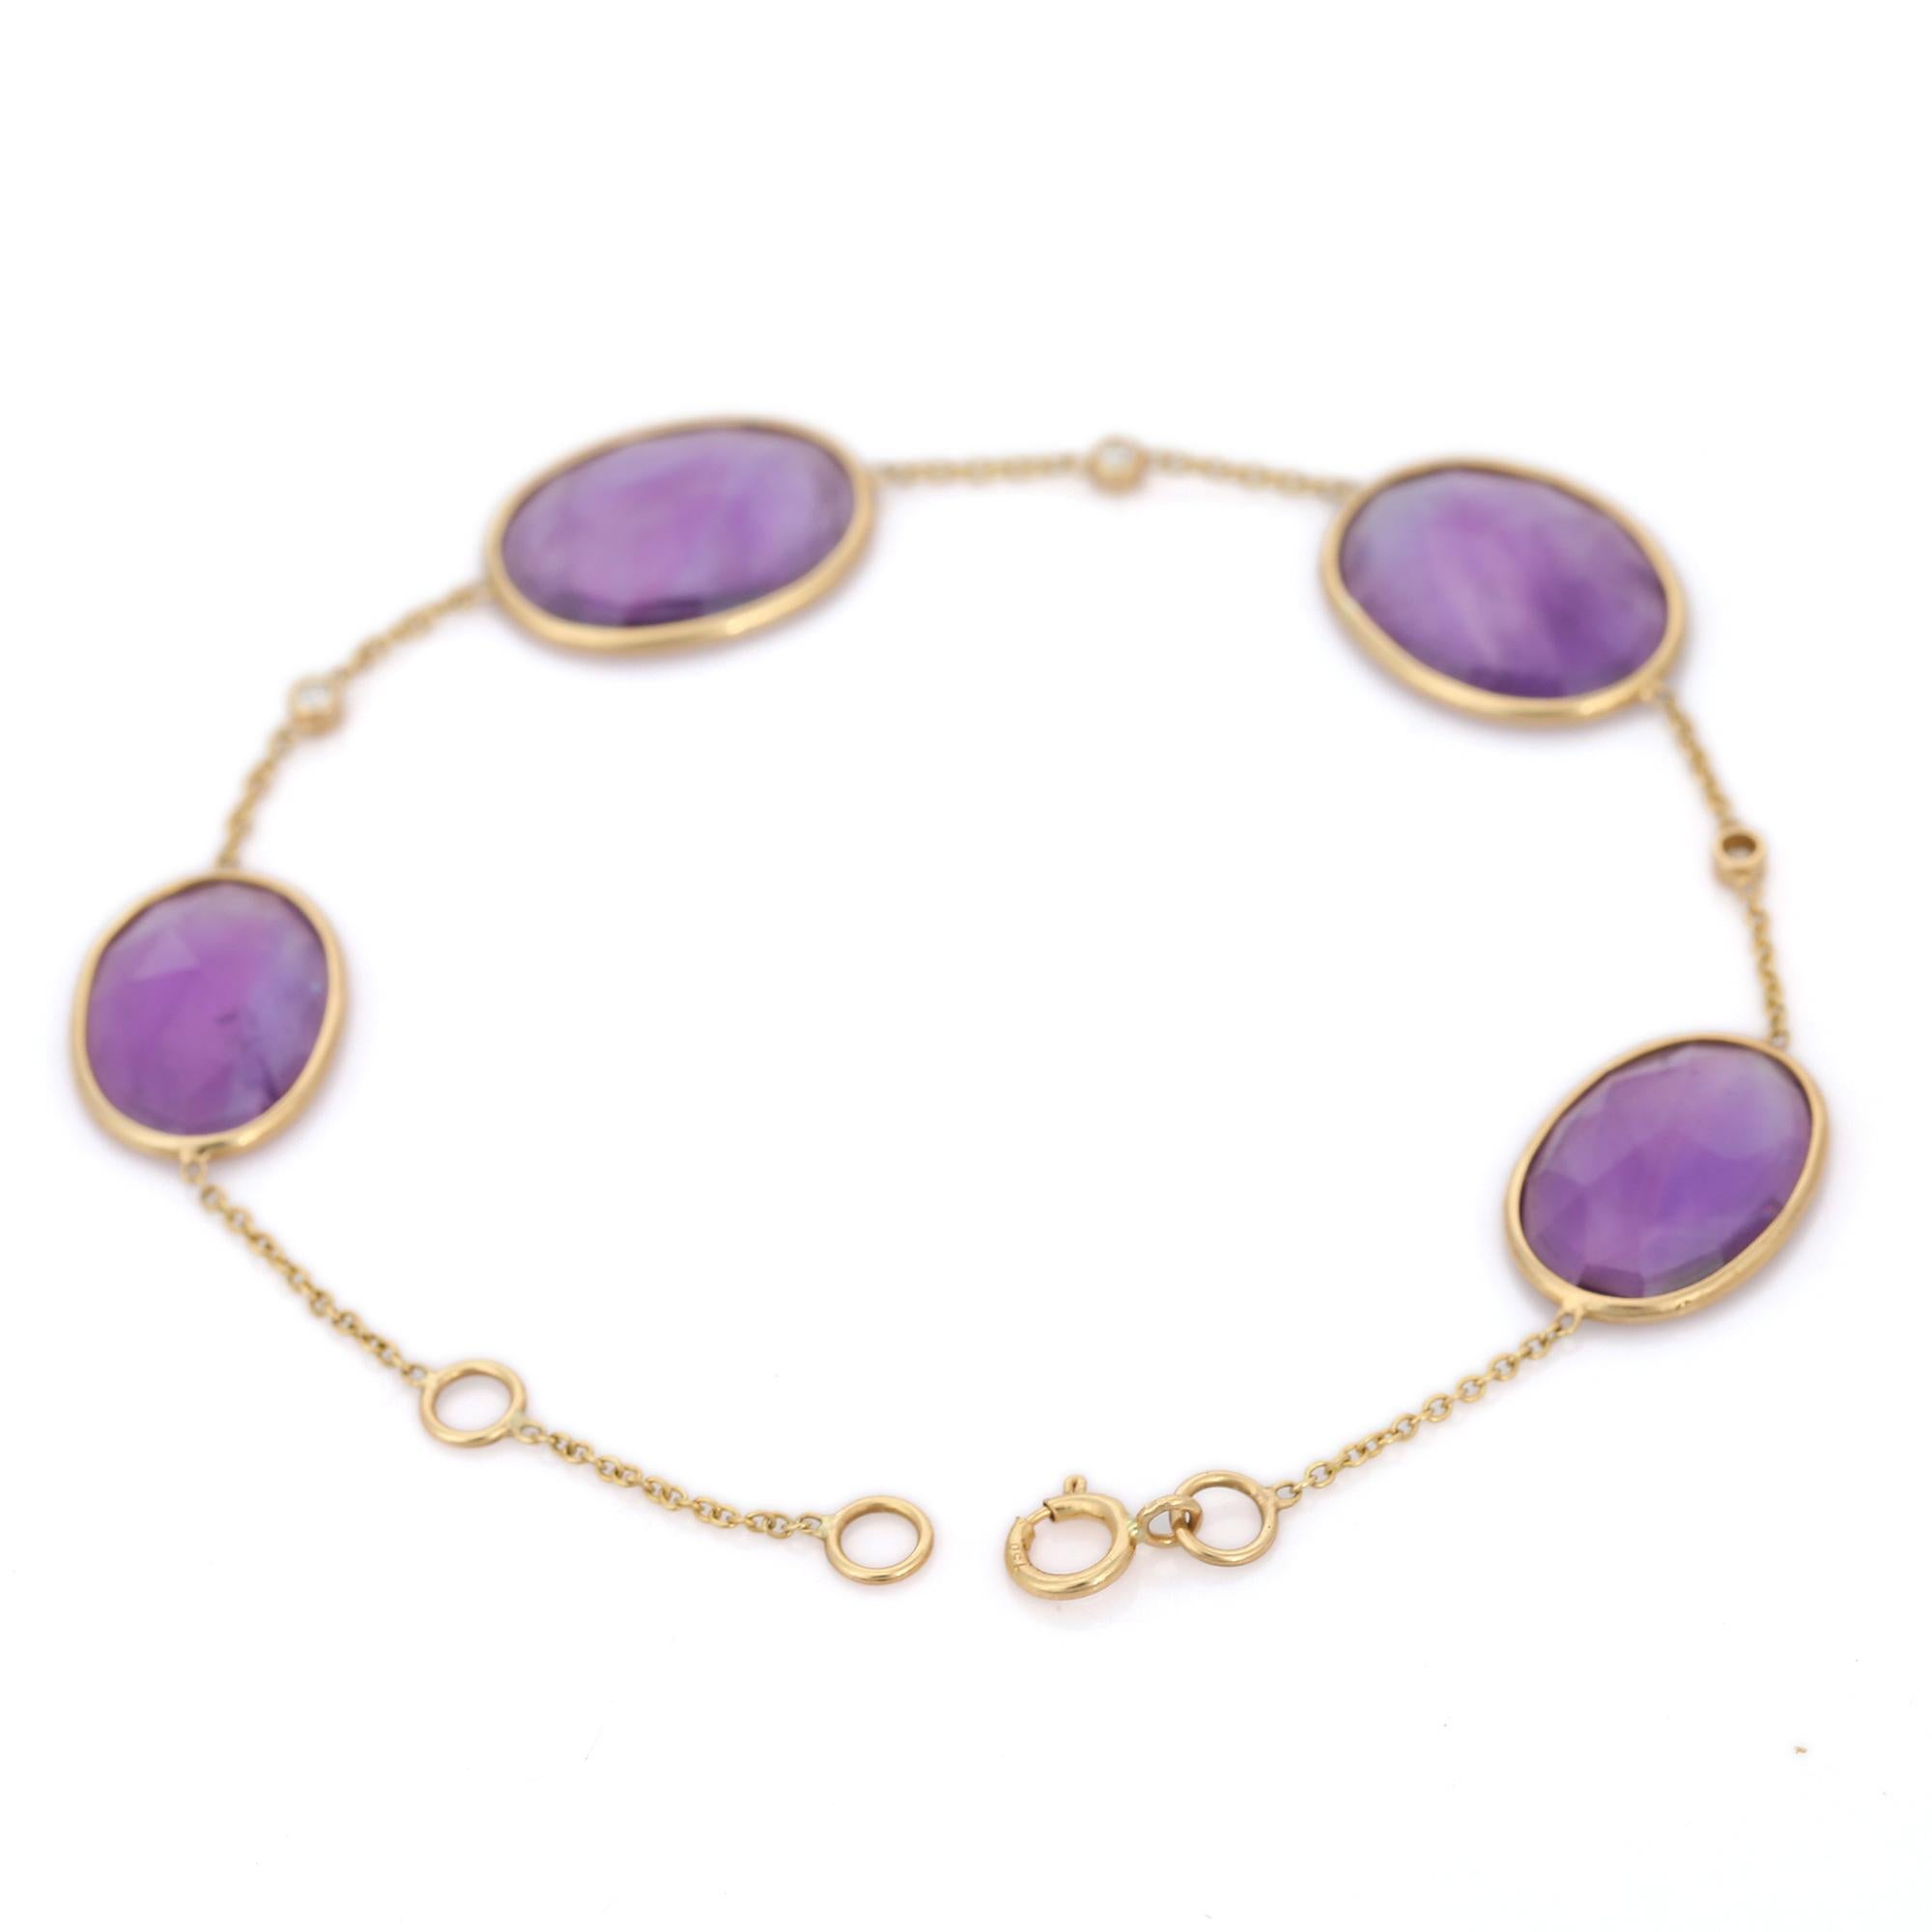 Modern 12.92 Ct Oval Cut Amethyst and Diamond Chain Bracelet in 18K Yellow Gold For Sale